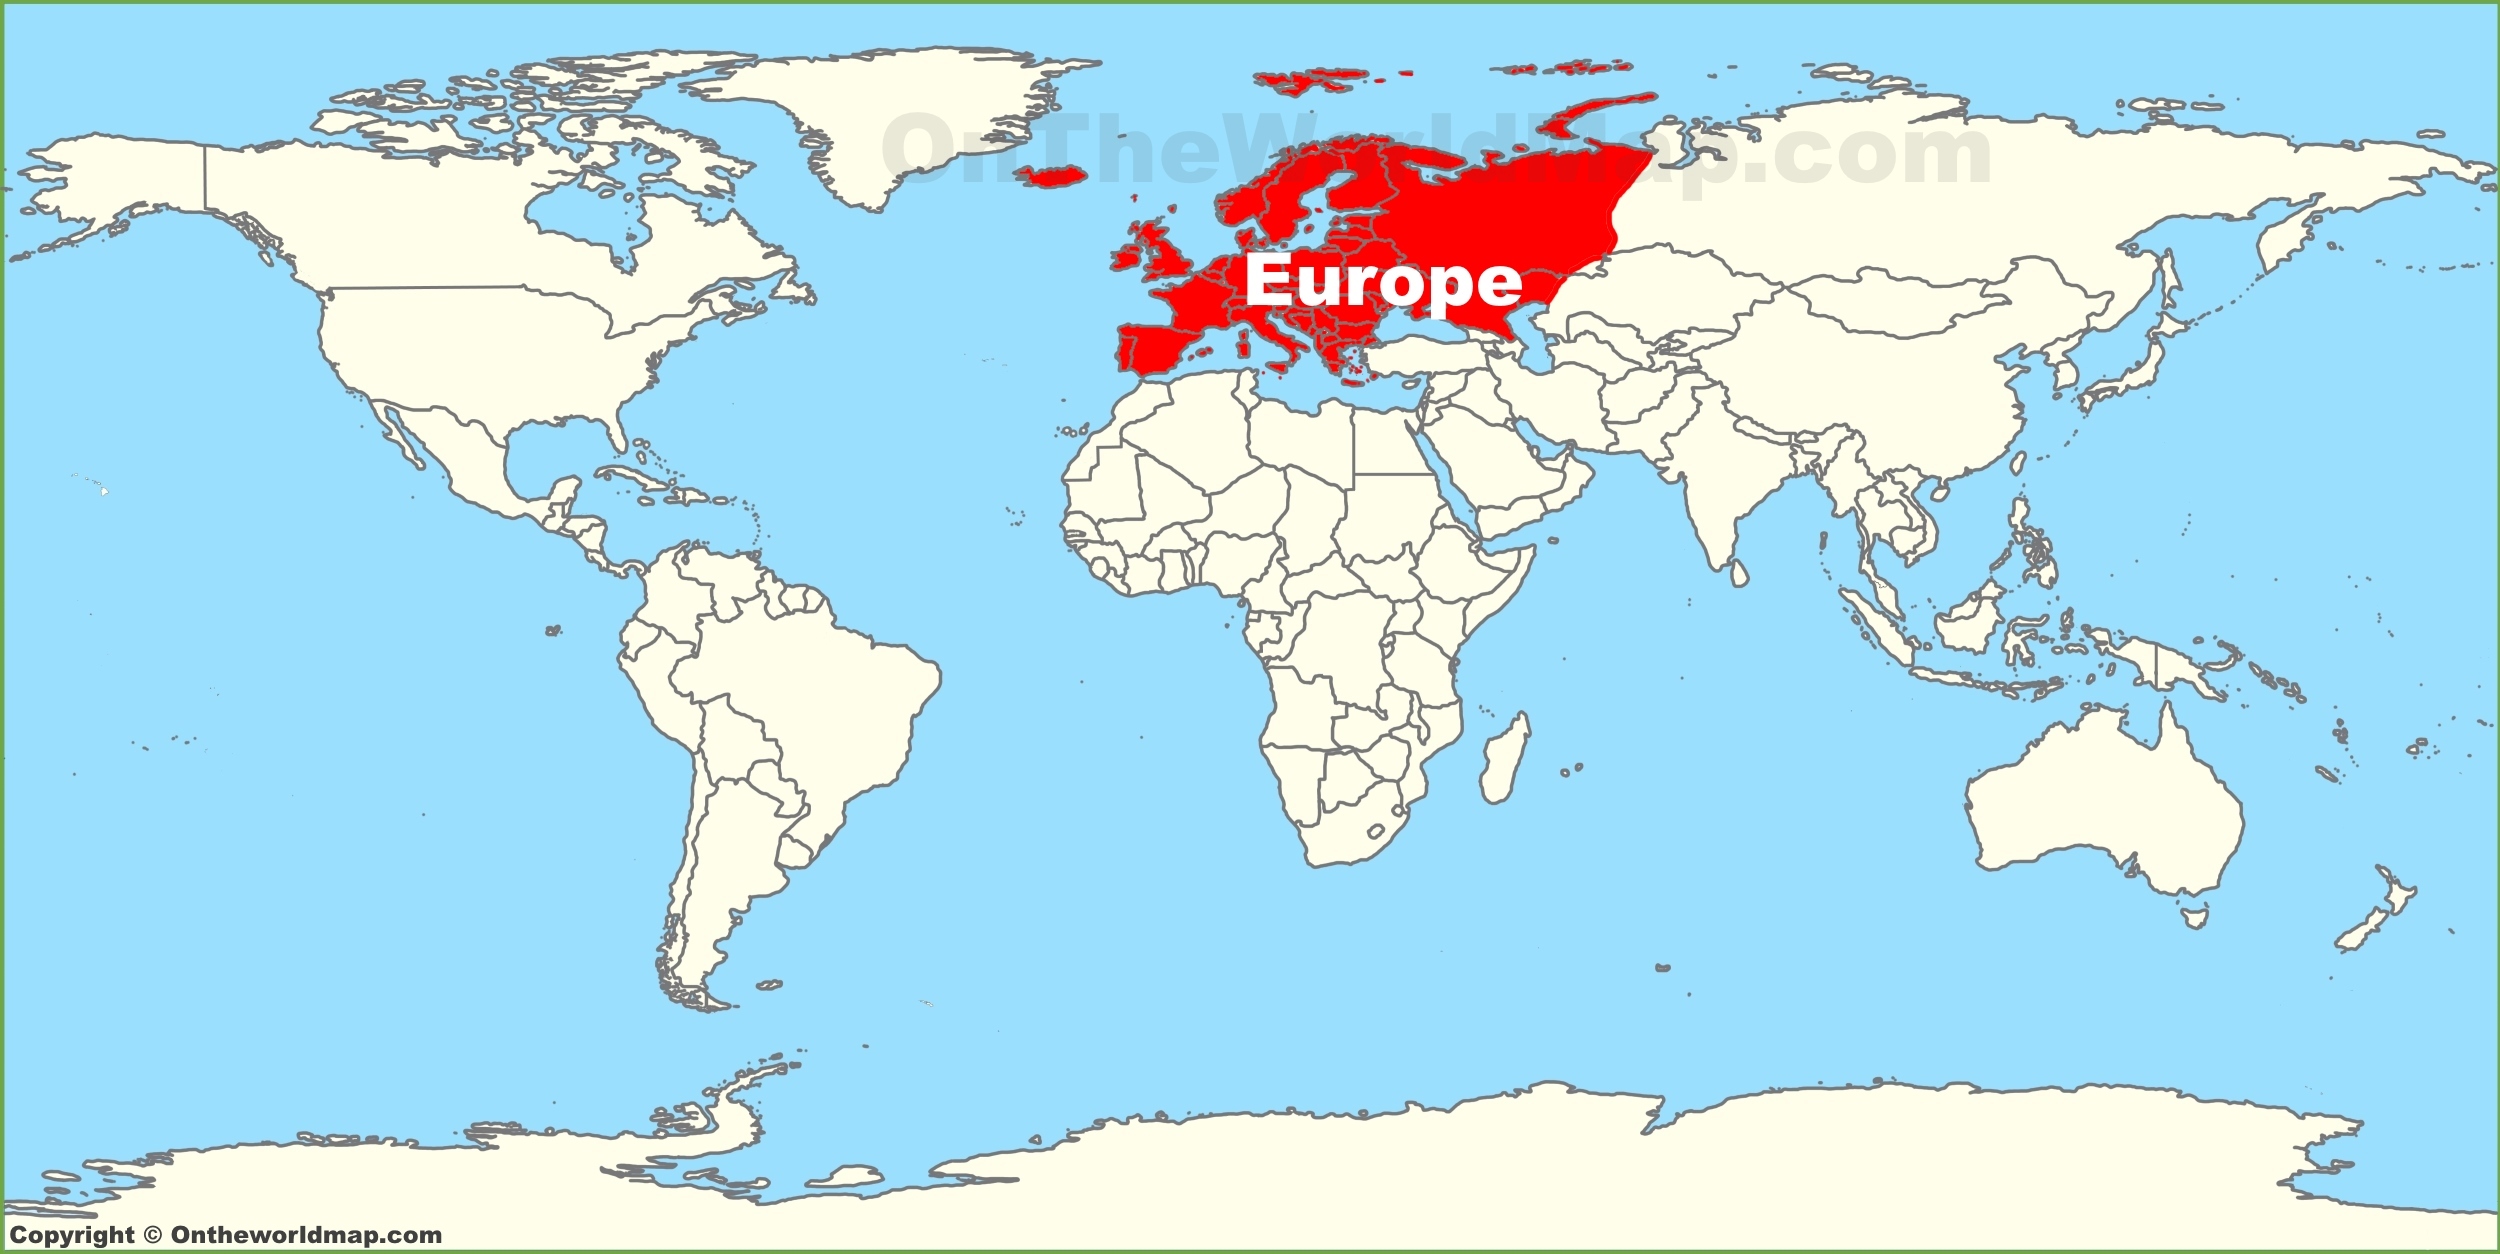 Europe location on the World Map